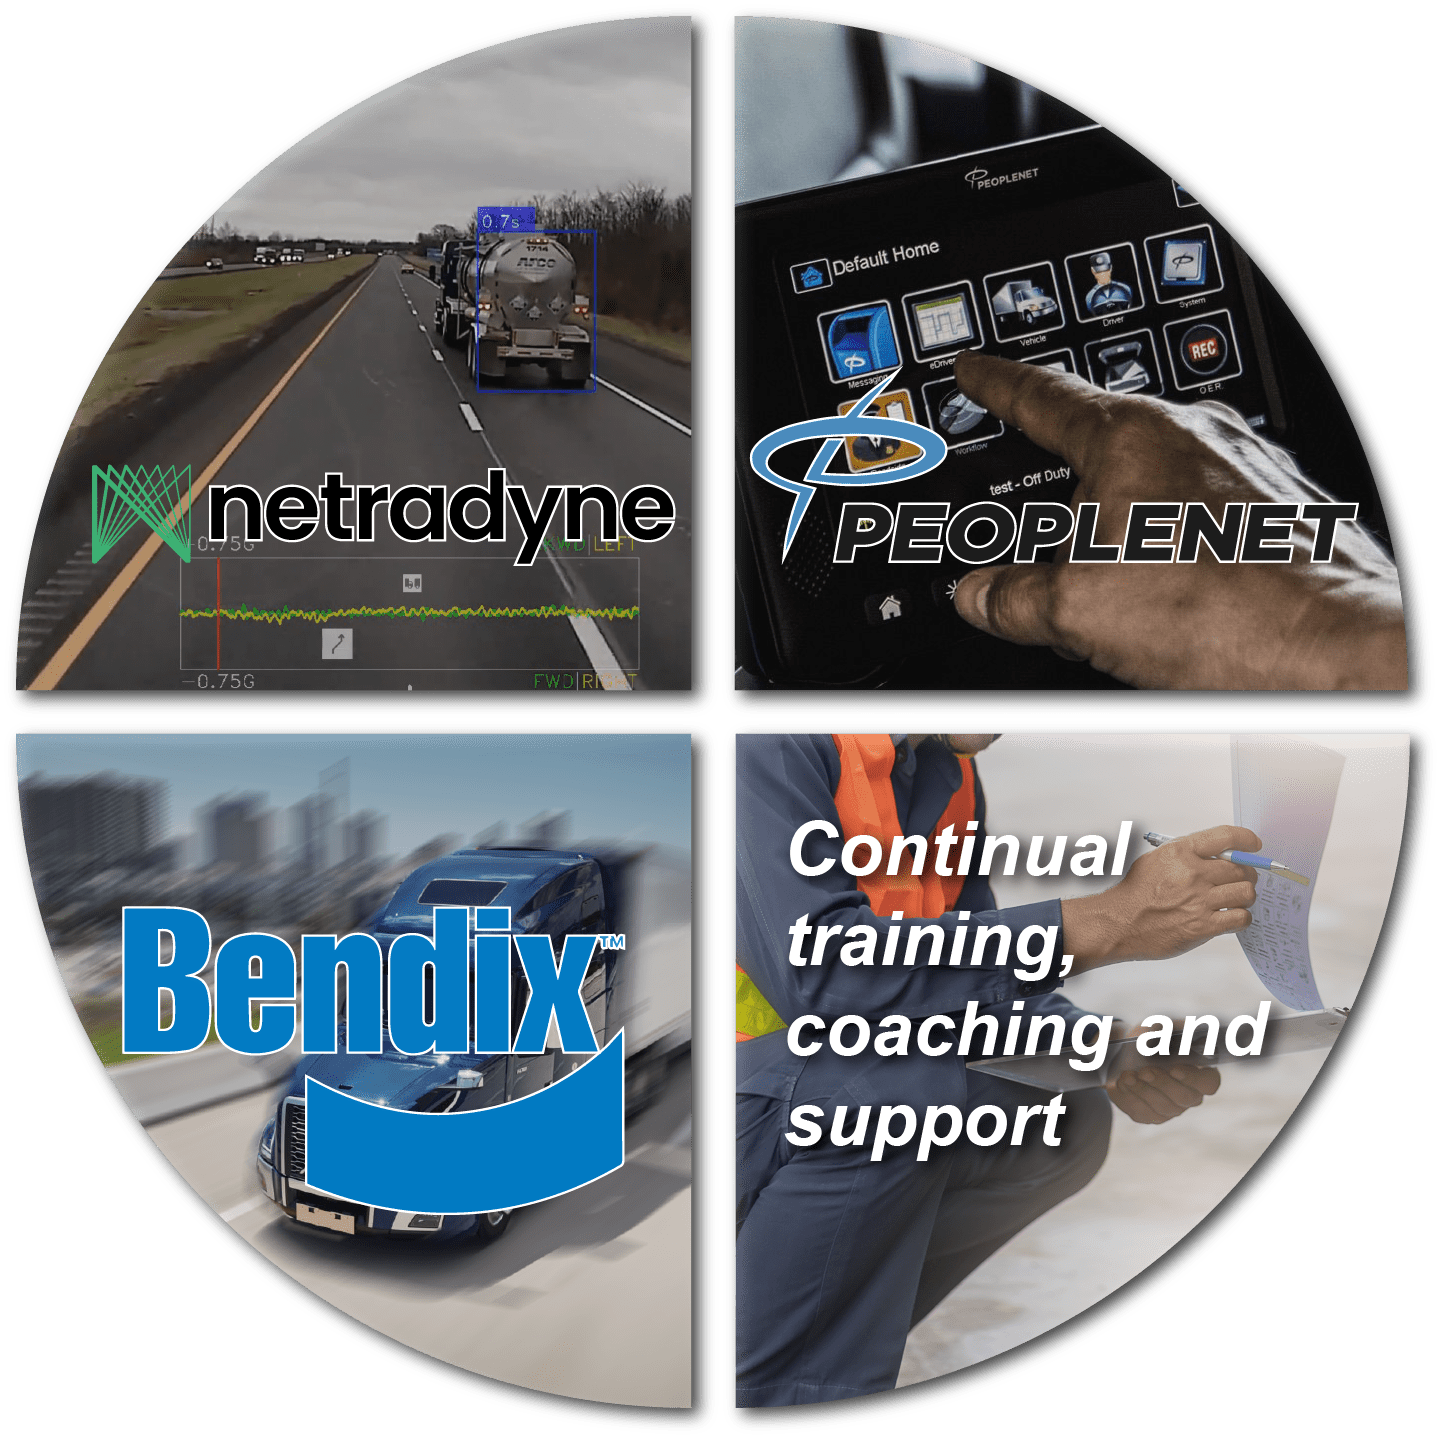 Netradyne, Peoplenet, and Bendix logos in a circle with text stating 'Continual training, coaching and support'.